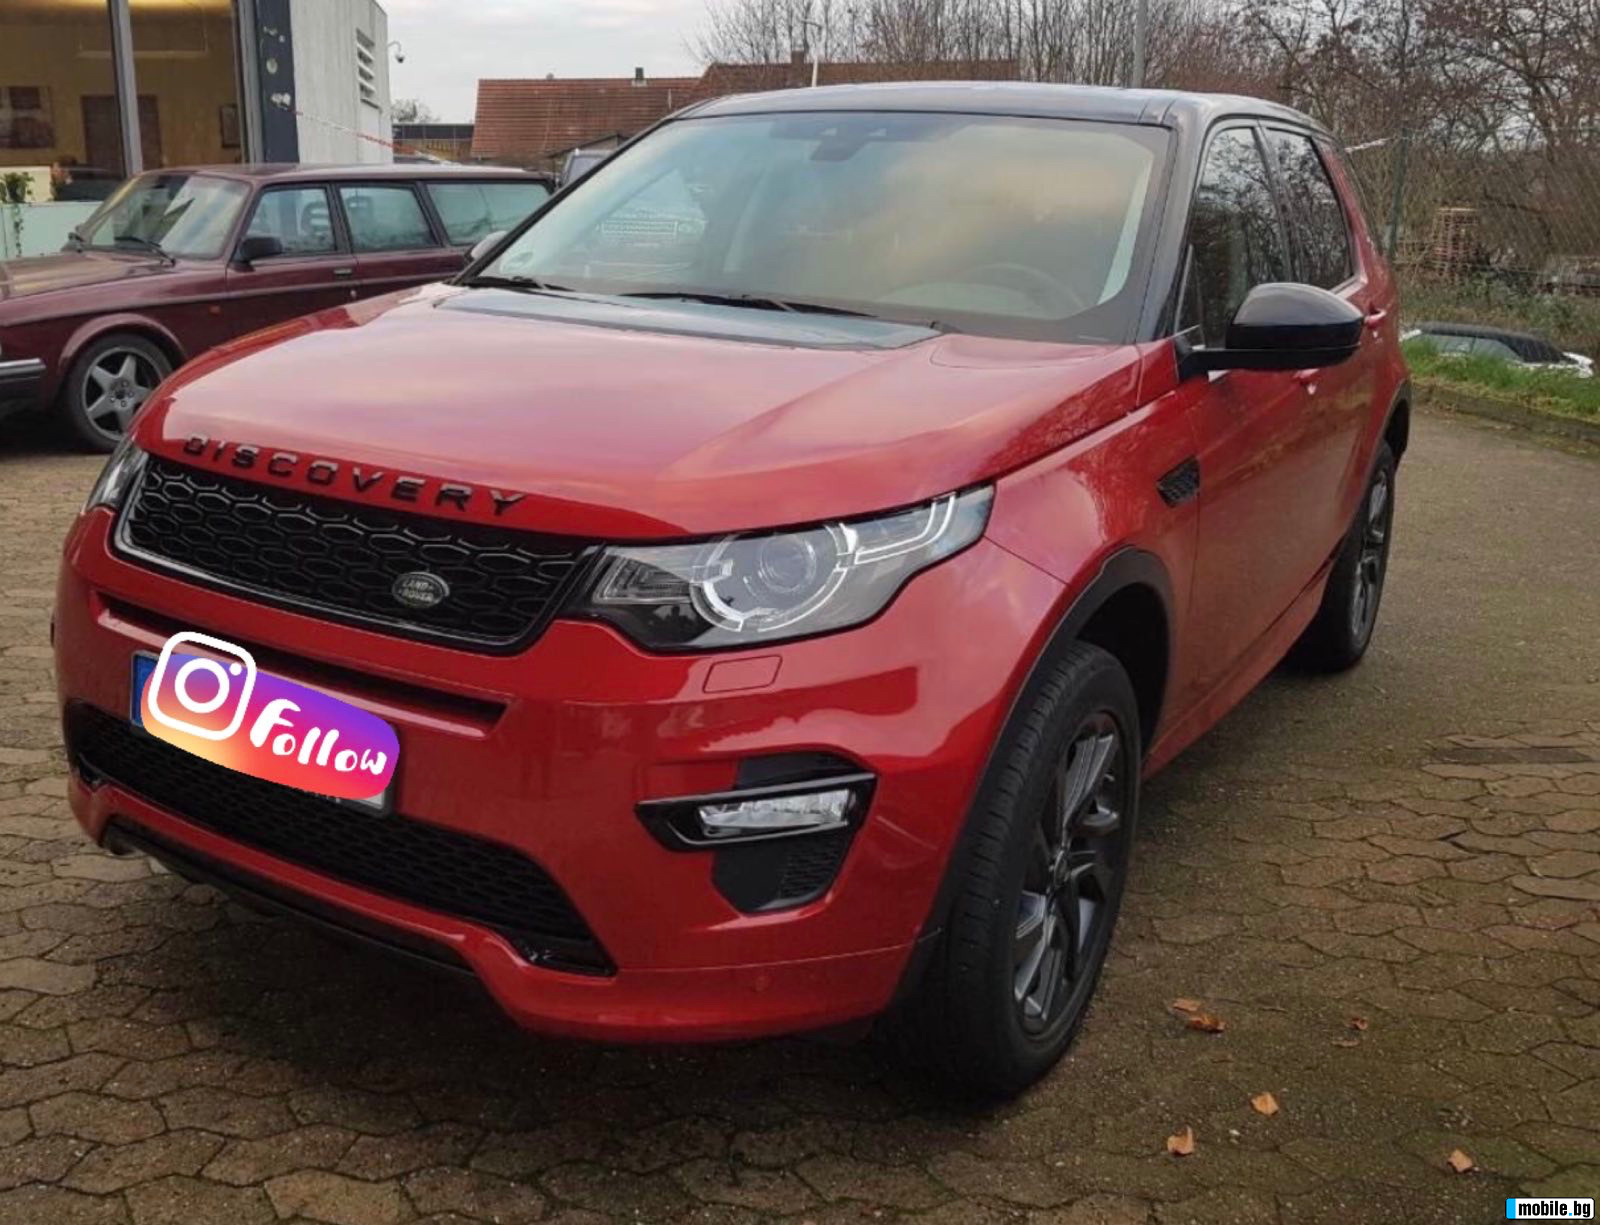 Land Rover Discovery SPORT  | Mobile.bg   3